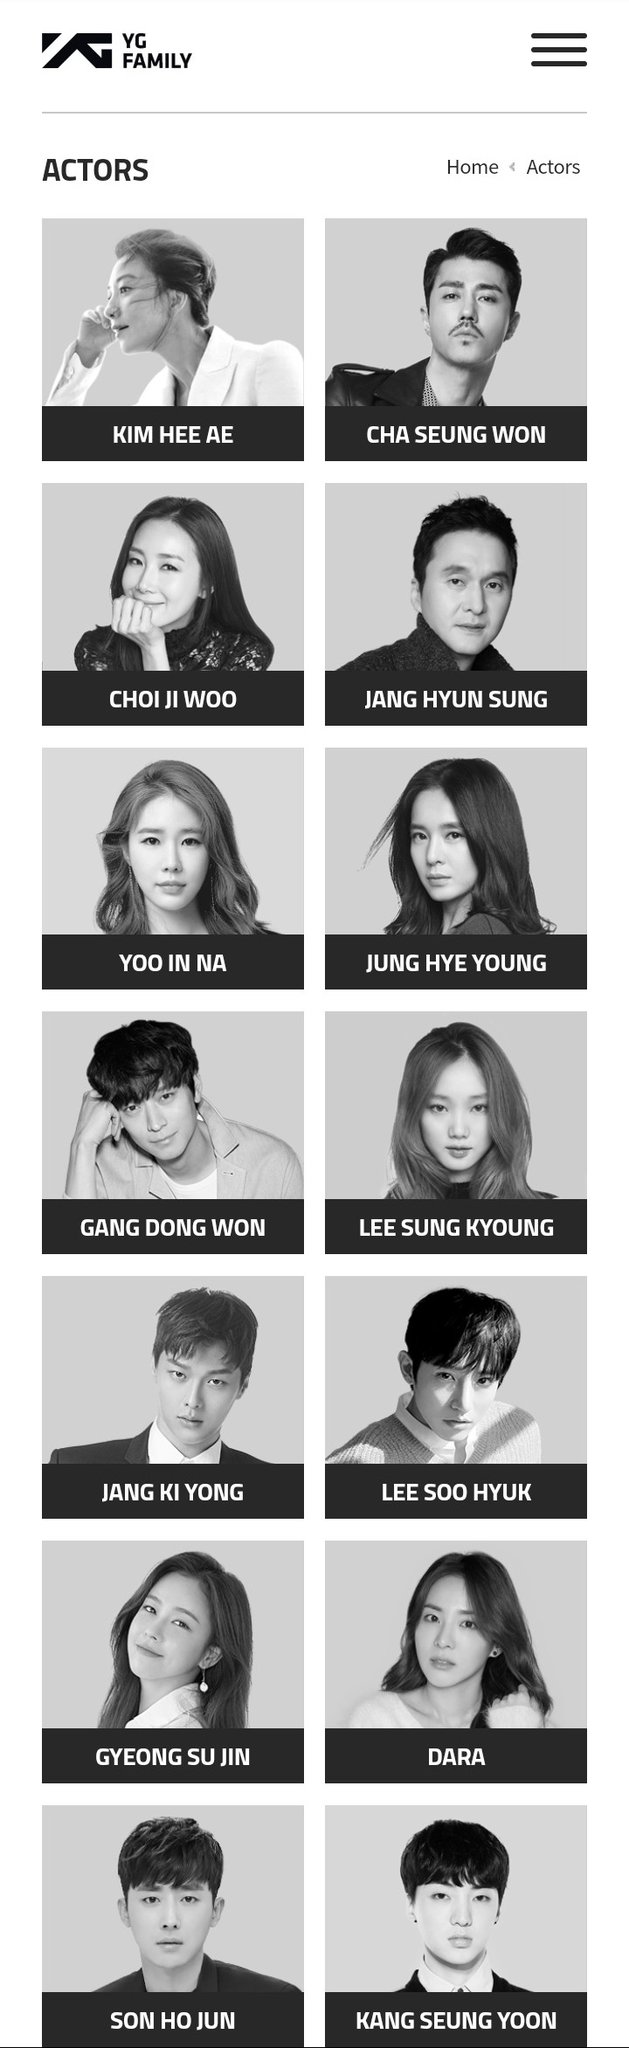 blackpink-jisoo-removed-from-yg-stage-3